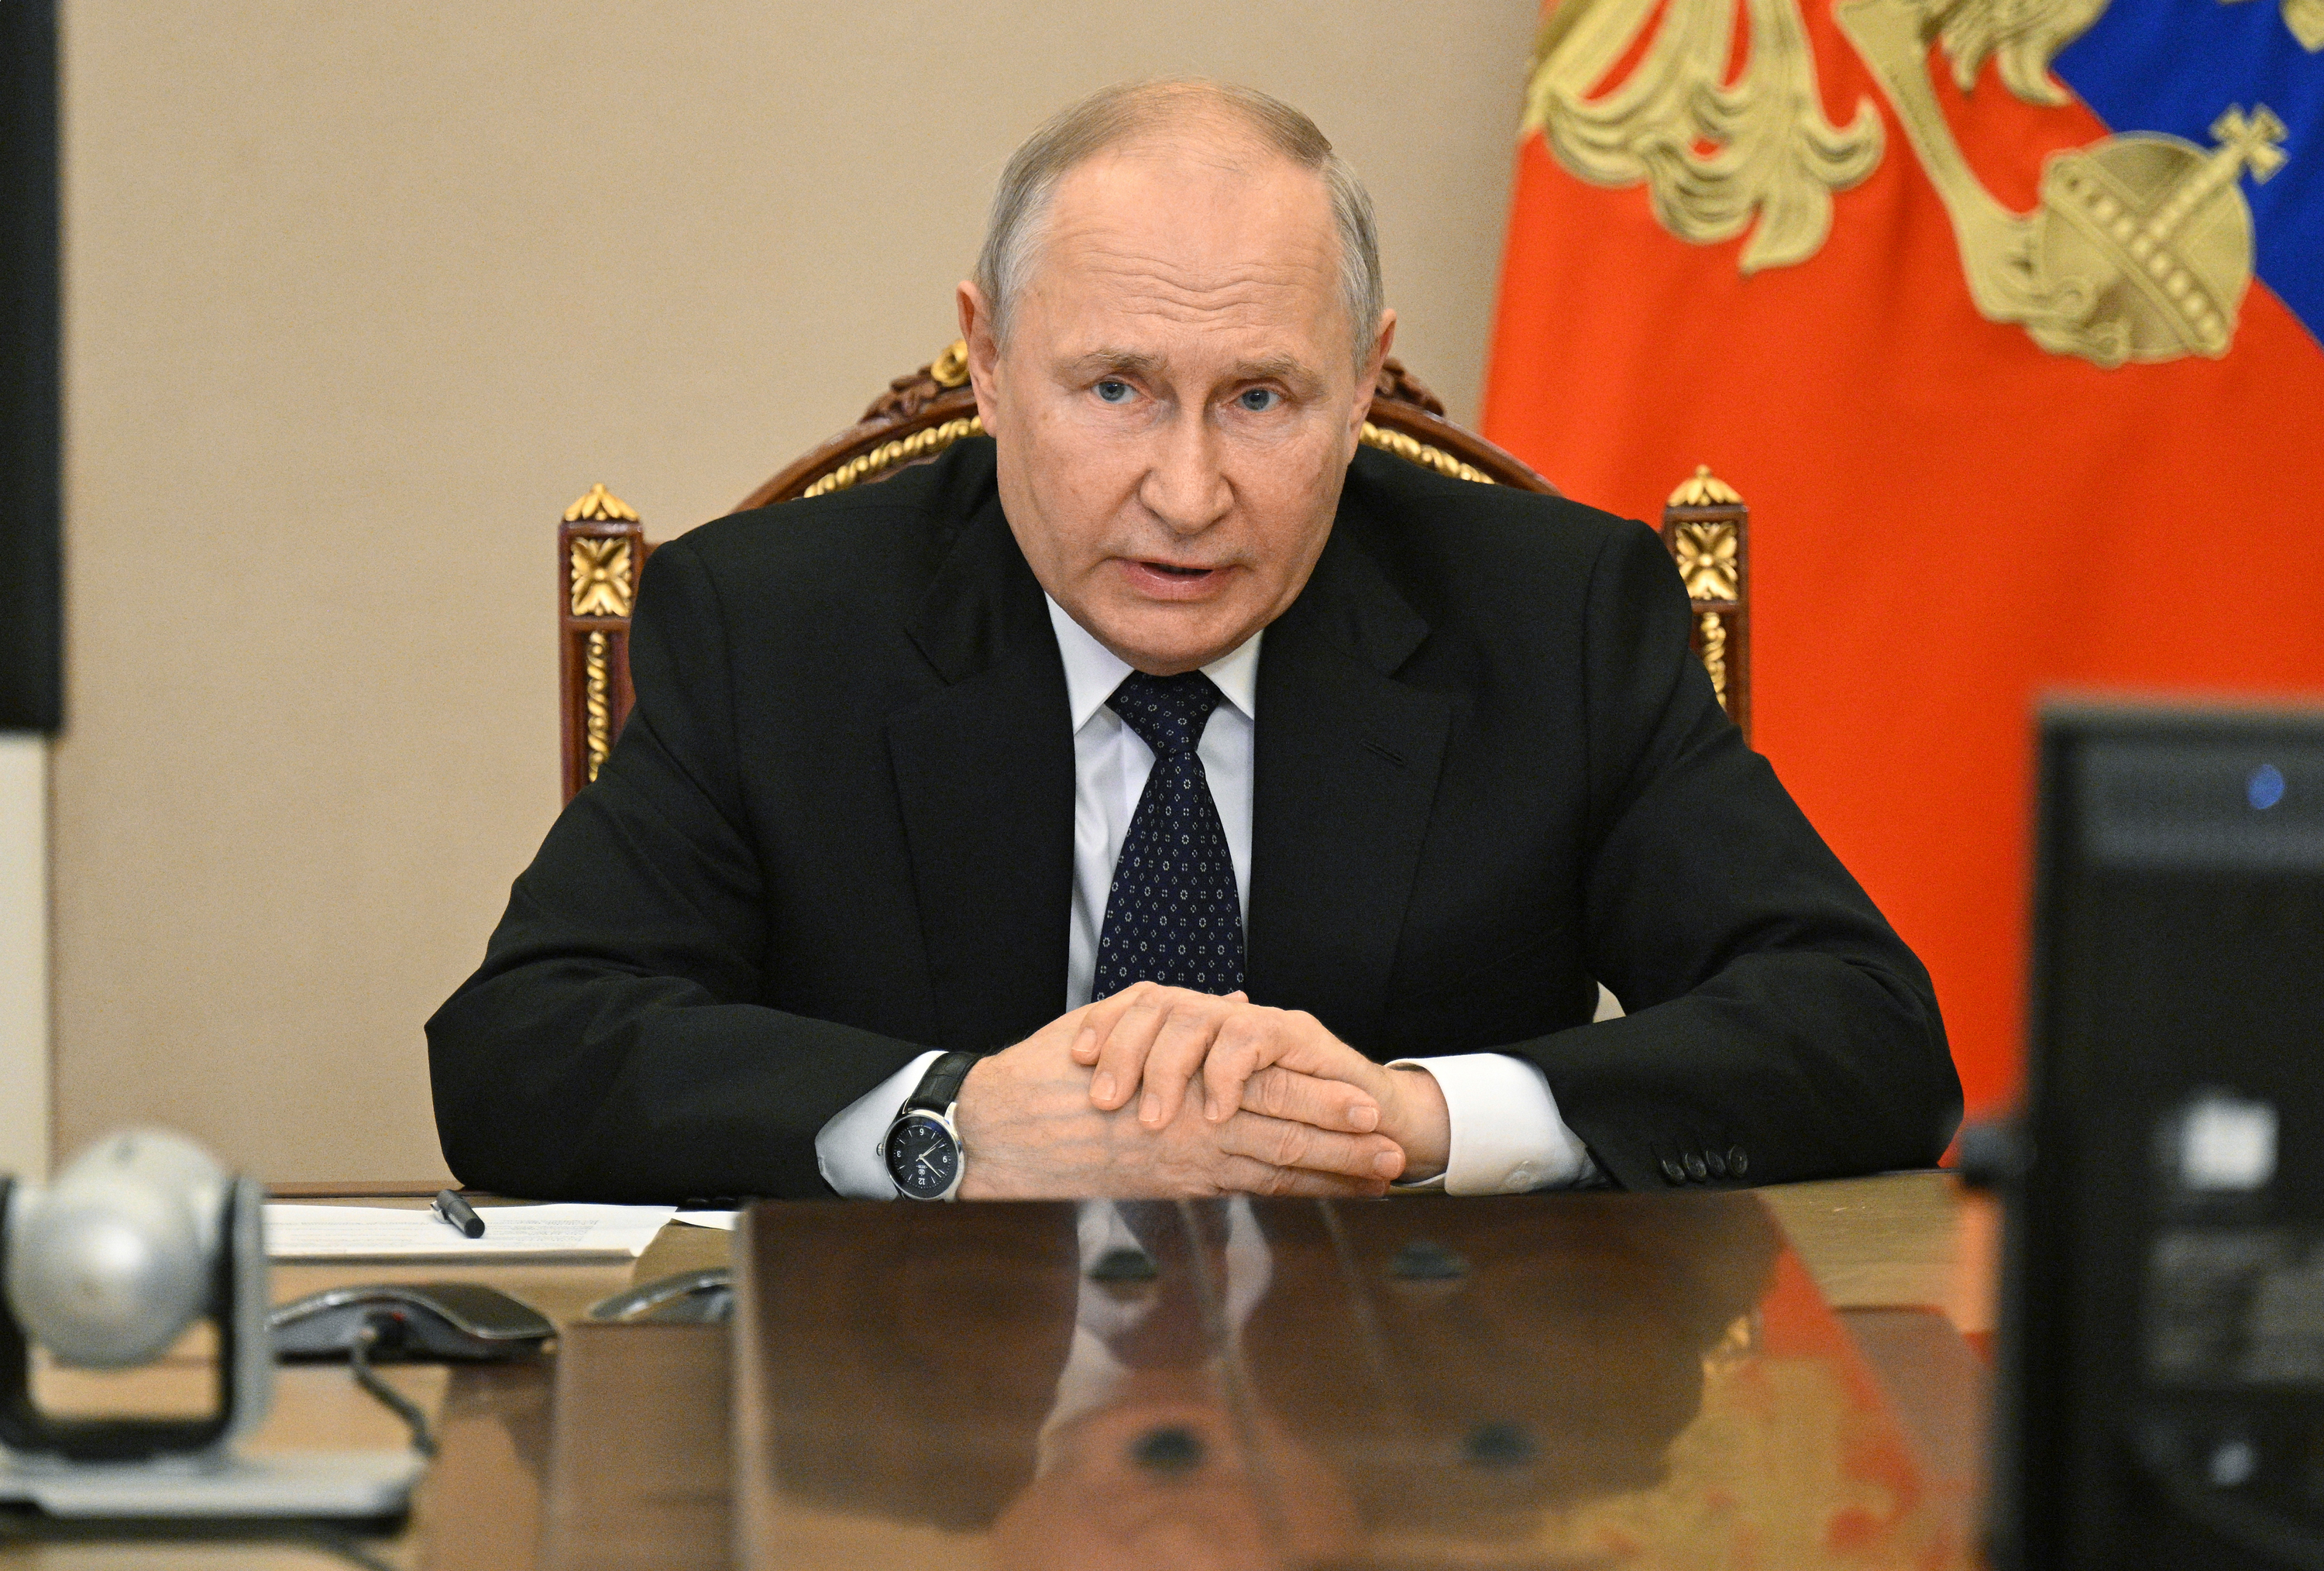 Vladimir Putin during a meeting in Moscow, Russia on Monday.